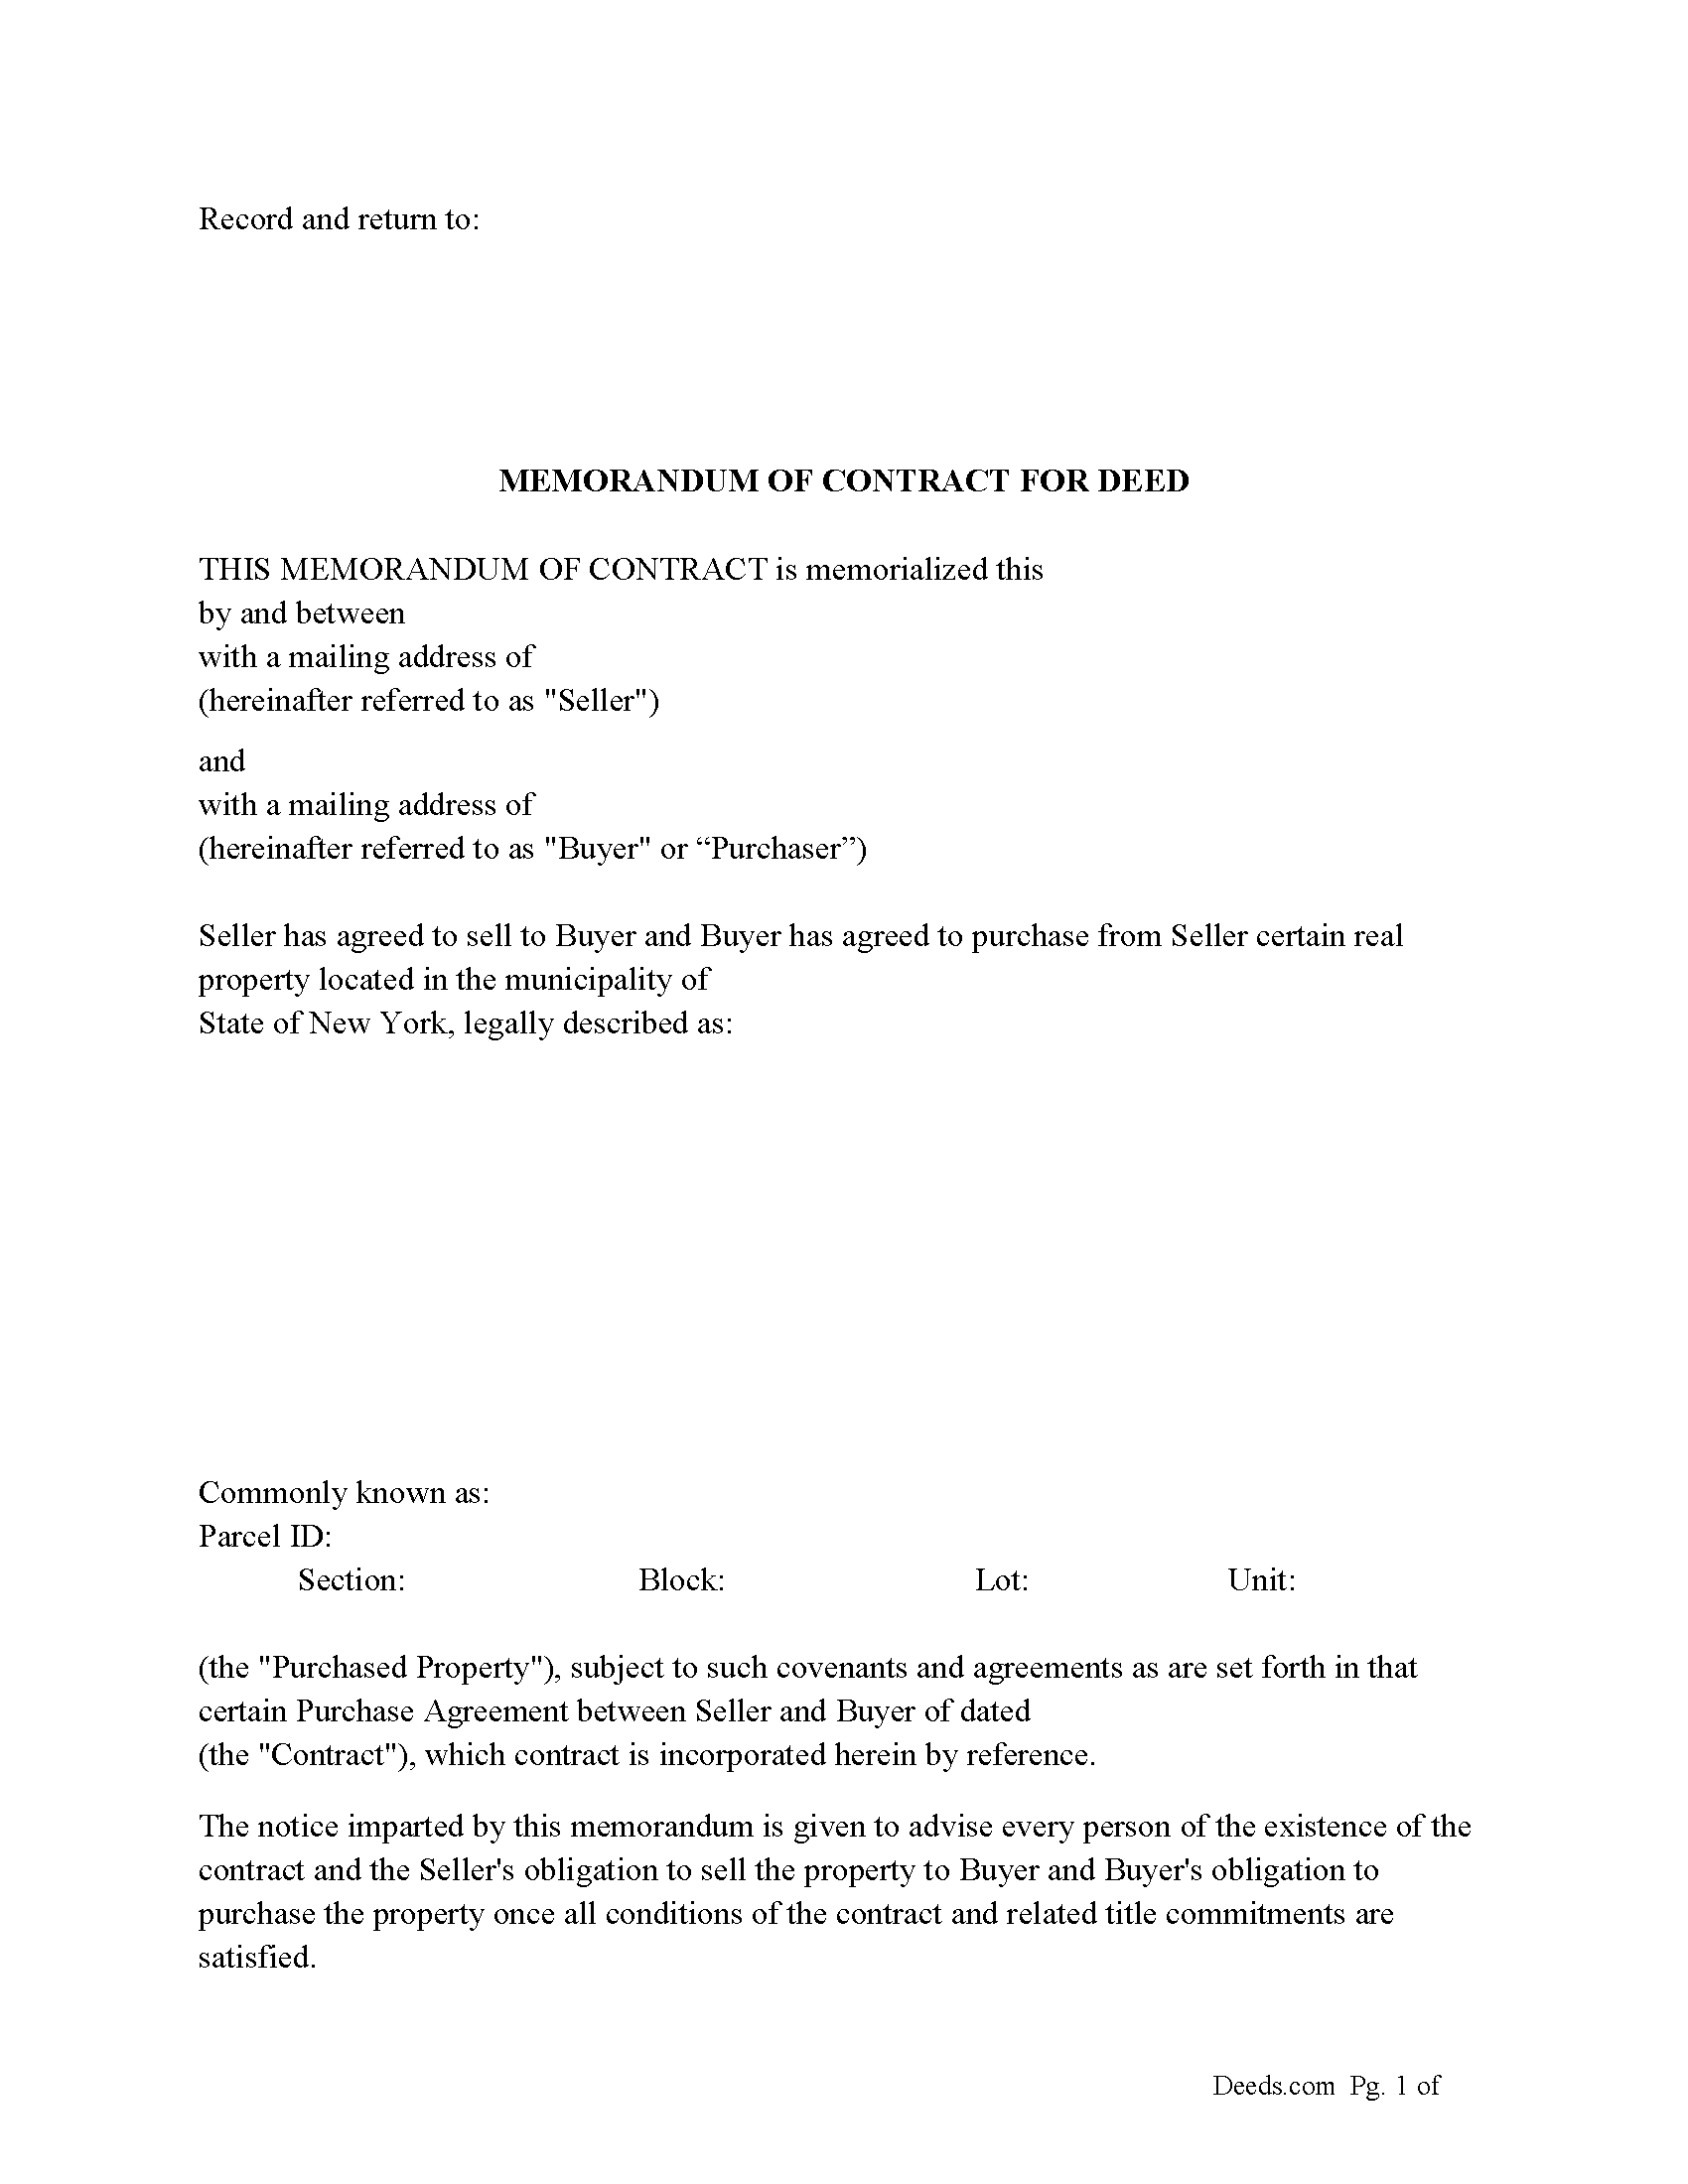 Westchester County Memorandum of Contract for Deed Form